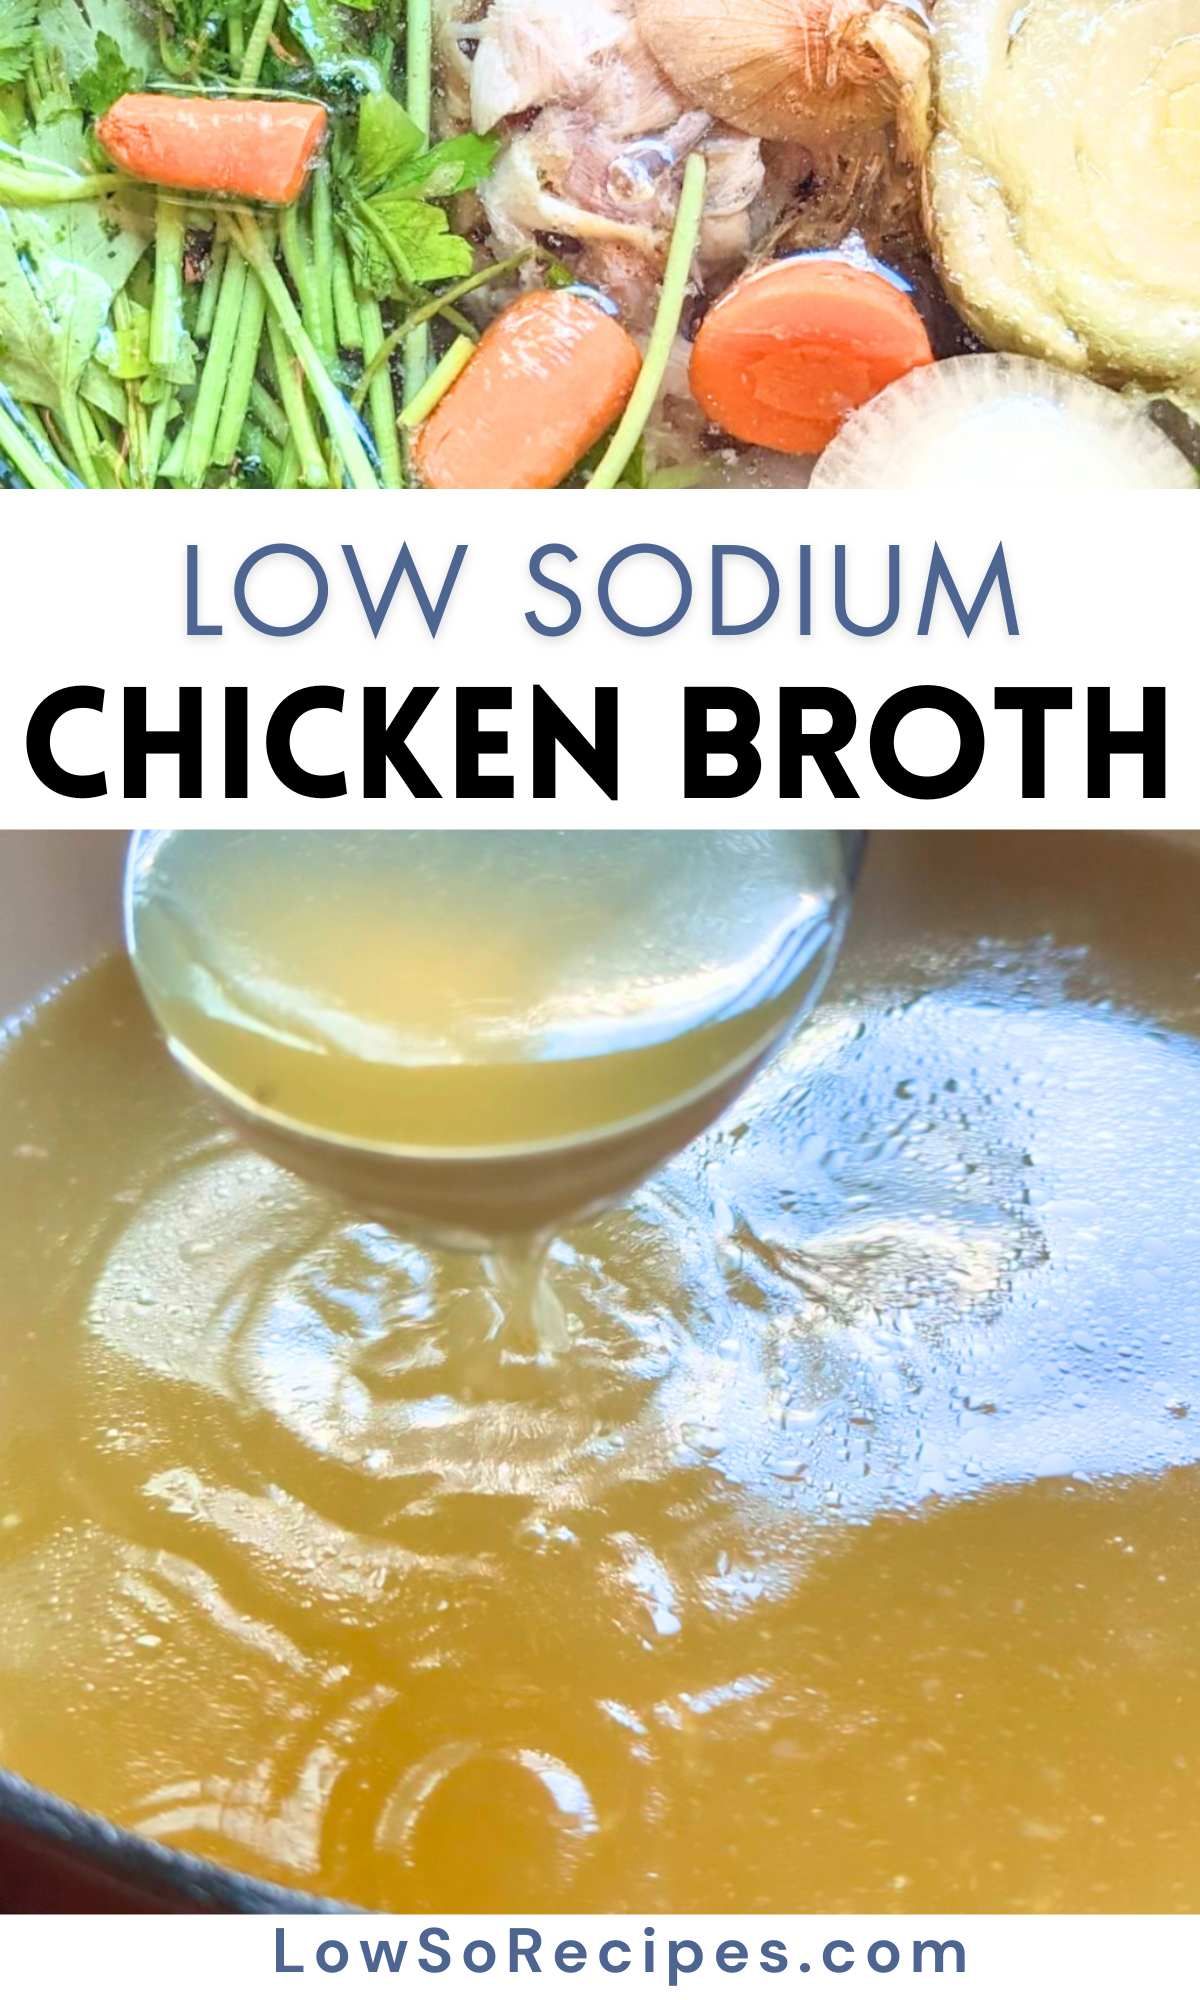 low sodium chicken broth recipe with parsley carrots chicken carcas and onions